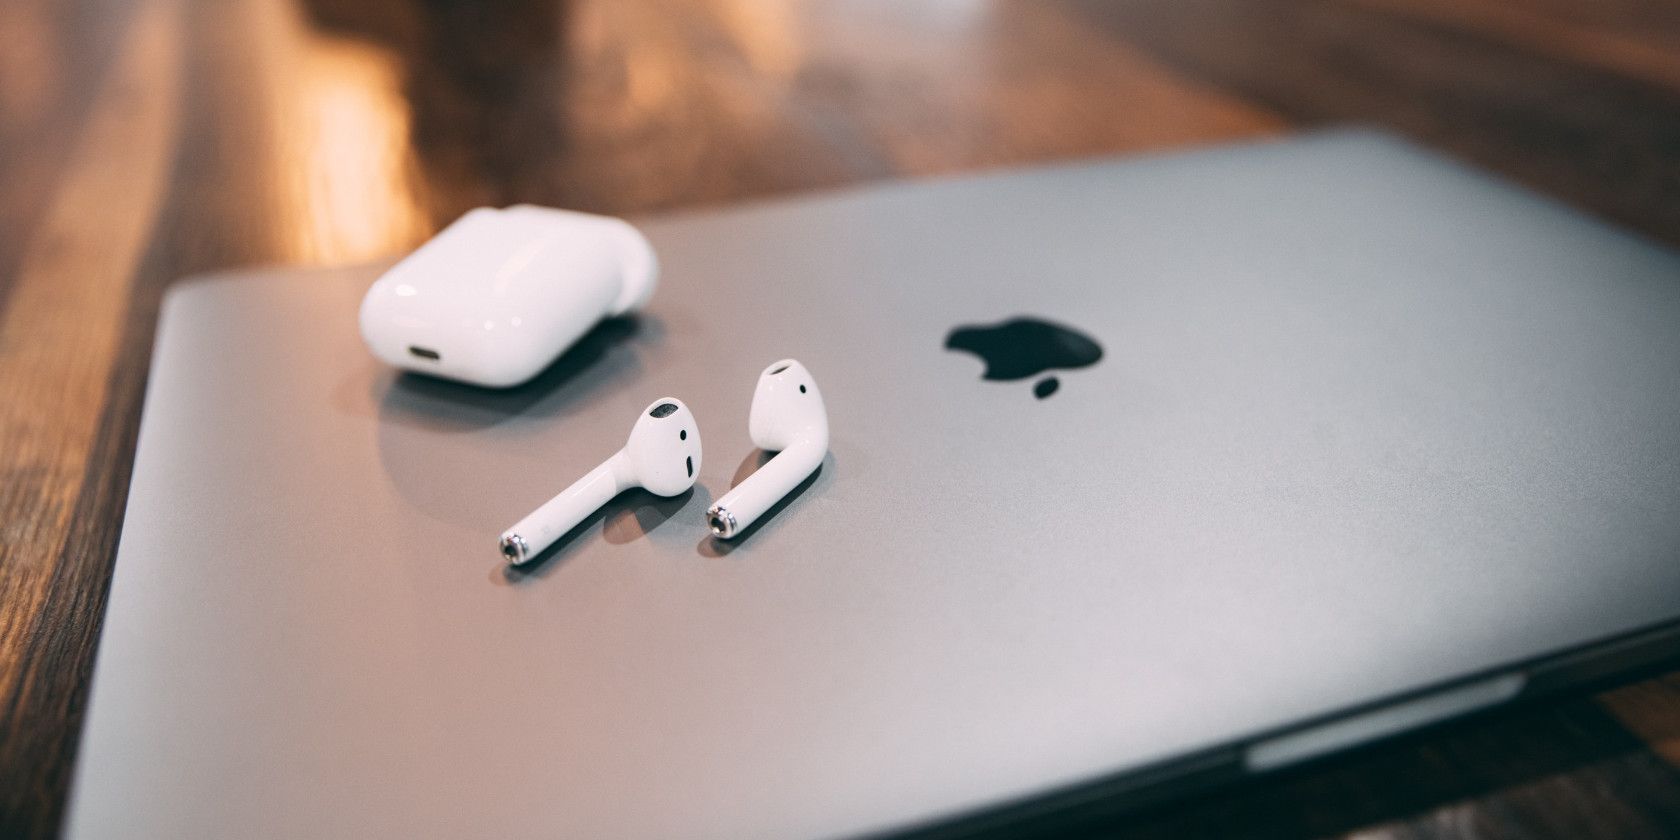 Connecting AirPods or AirPods Pro to a Mac 